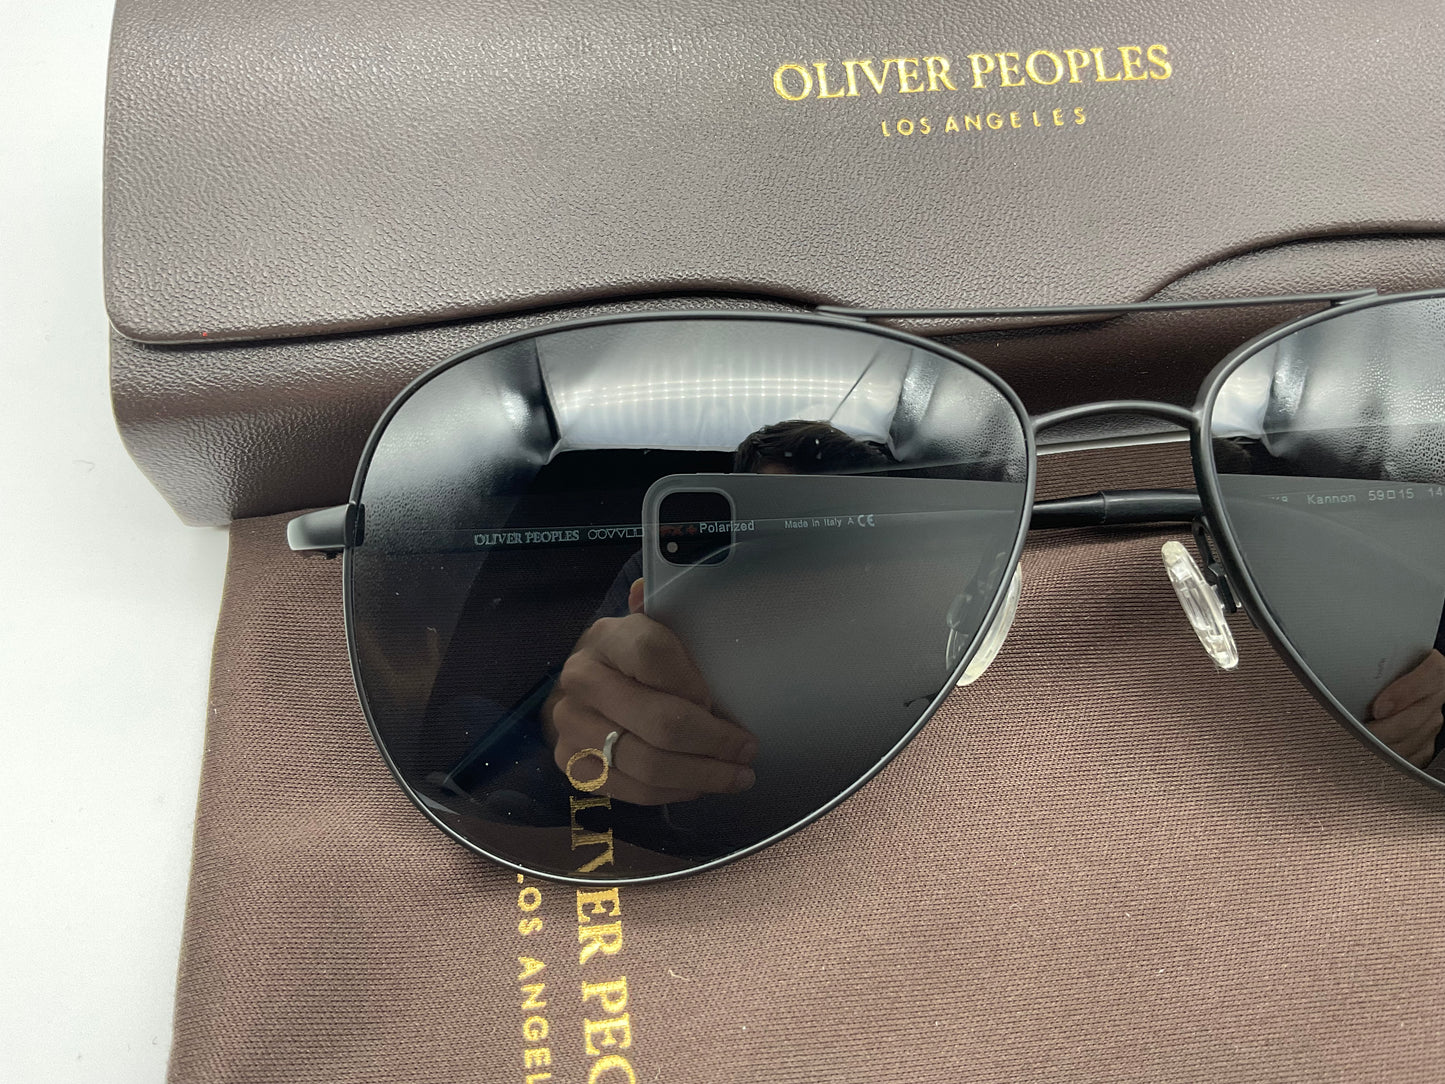 OLIVER PEOPLES KANNON 59mm OV1191S 5062/K8 VFX+ POLARIZED BLACK AUTHENTIC ITALY USED